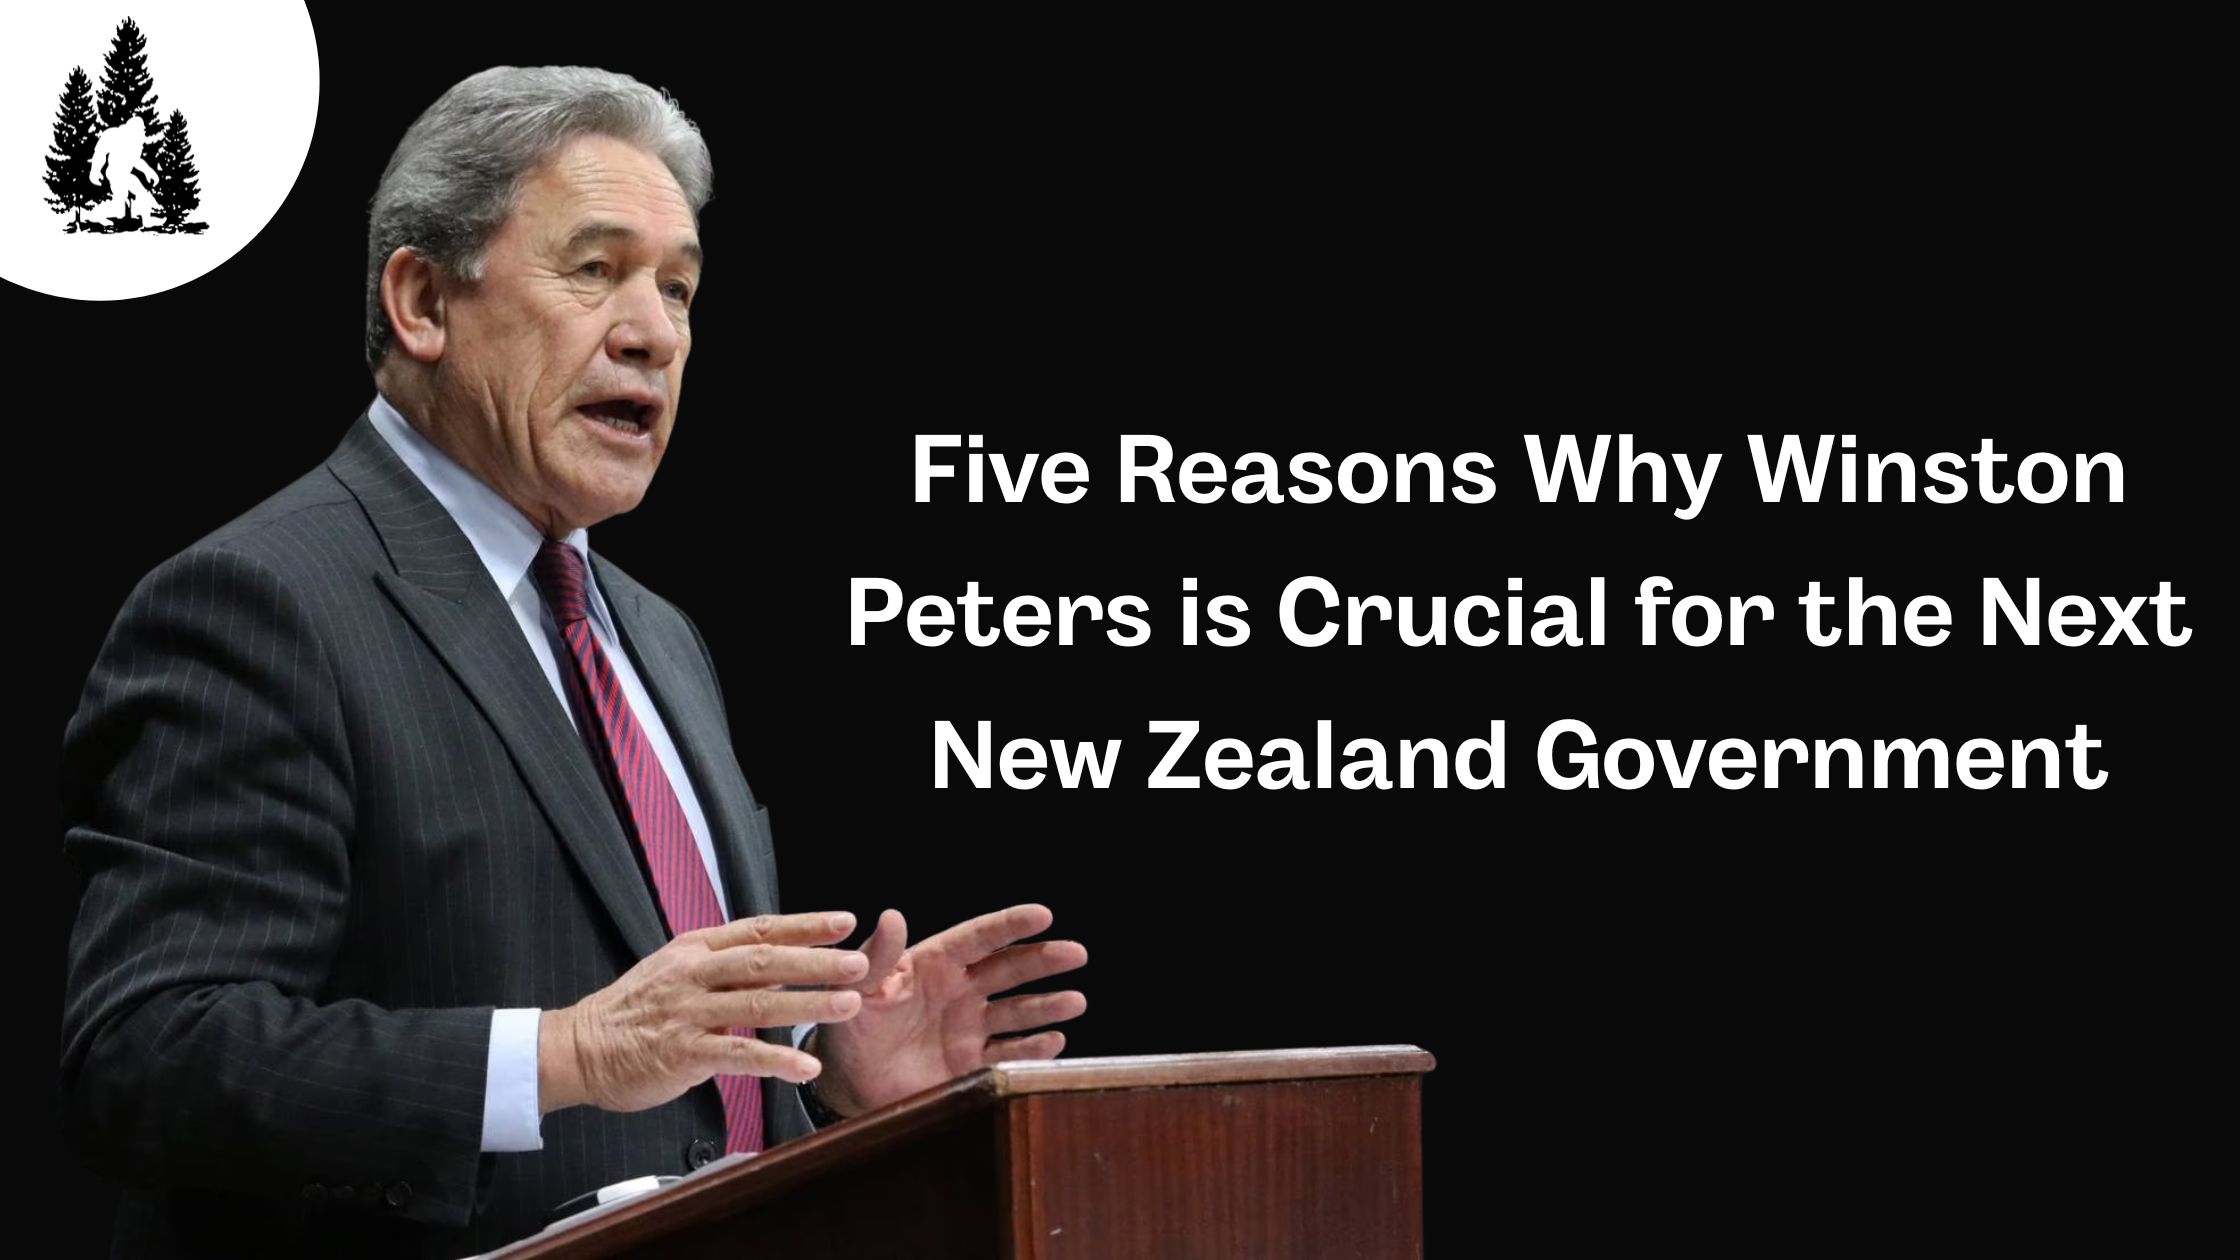 Winston Peters is Crucial for the Next New Zealand Government